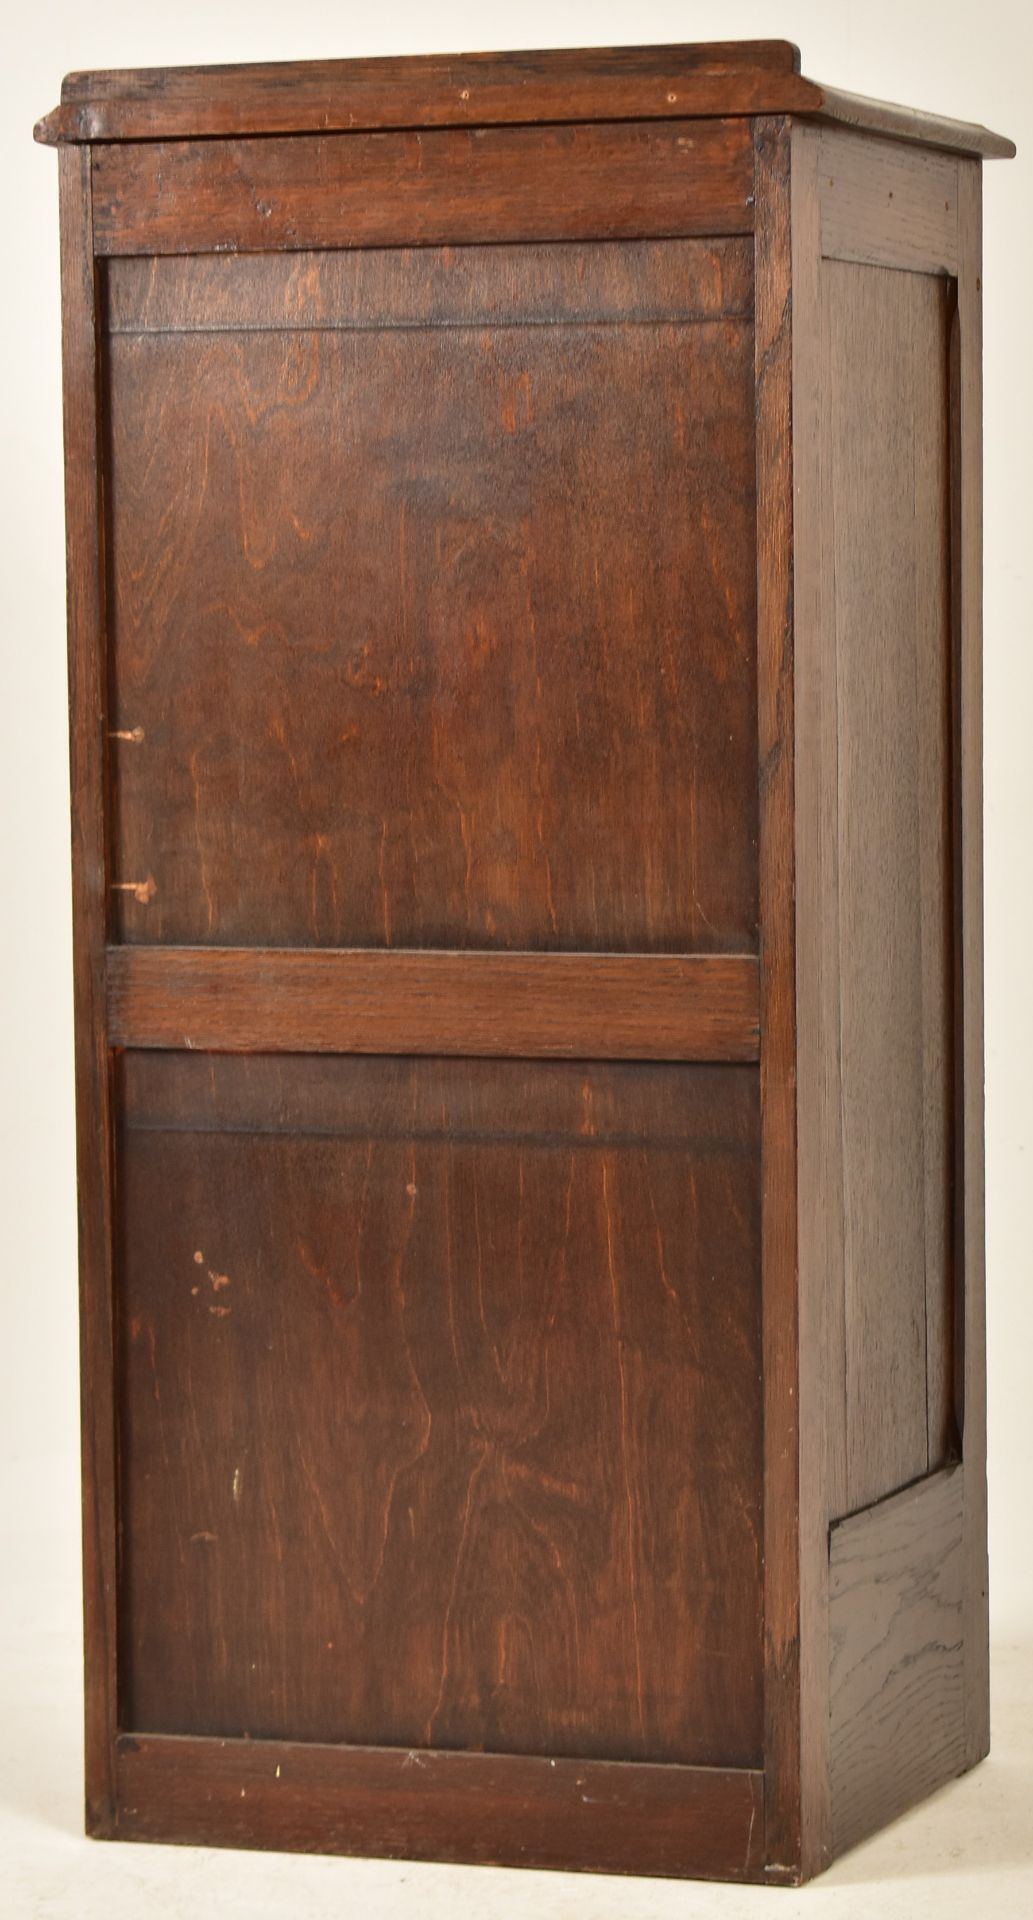 EARLY 20TH CENTURY ART DECO OAK PEDESTAL CABINET CHEST - Image 6 of 6